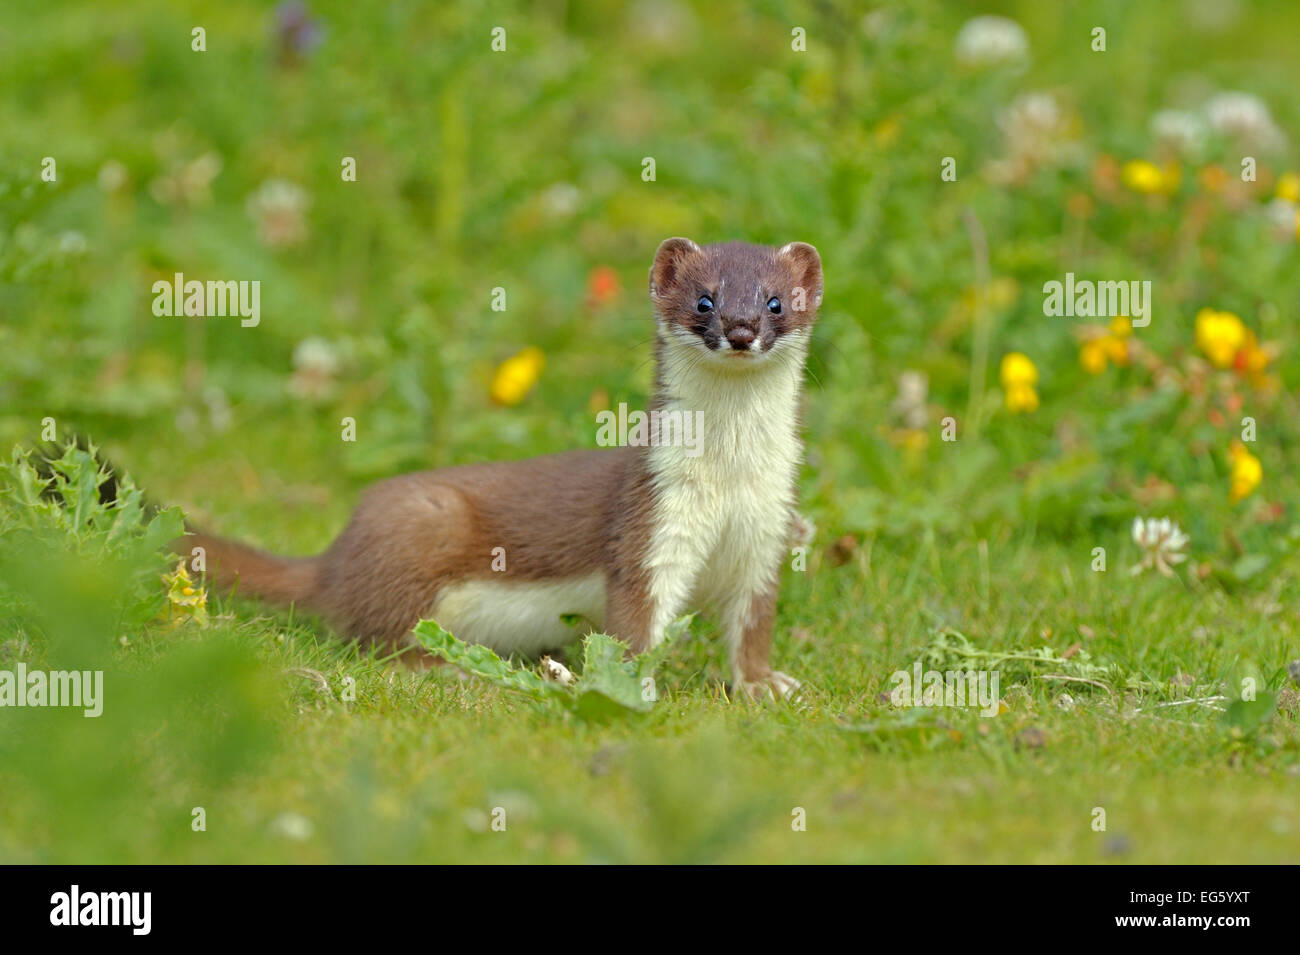 Stoat (Mustela erminea), UK, July. 2020VISION Book Plate. Did you know? There are 37 subspecies of stoat around the world. Stock Photo